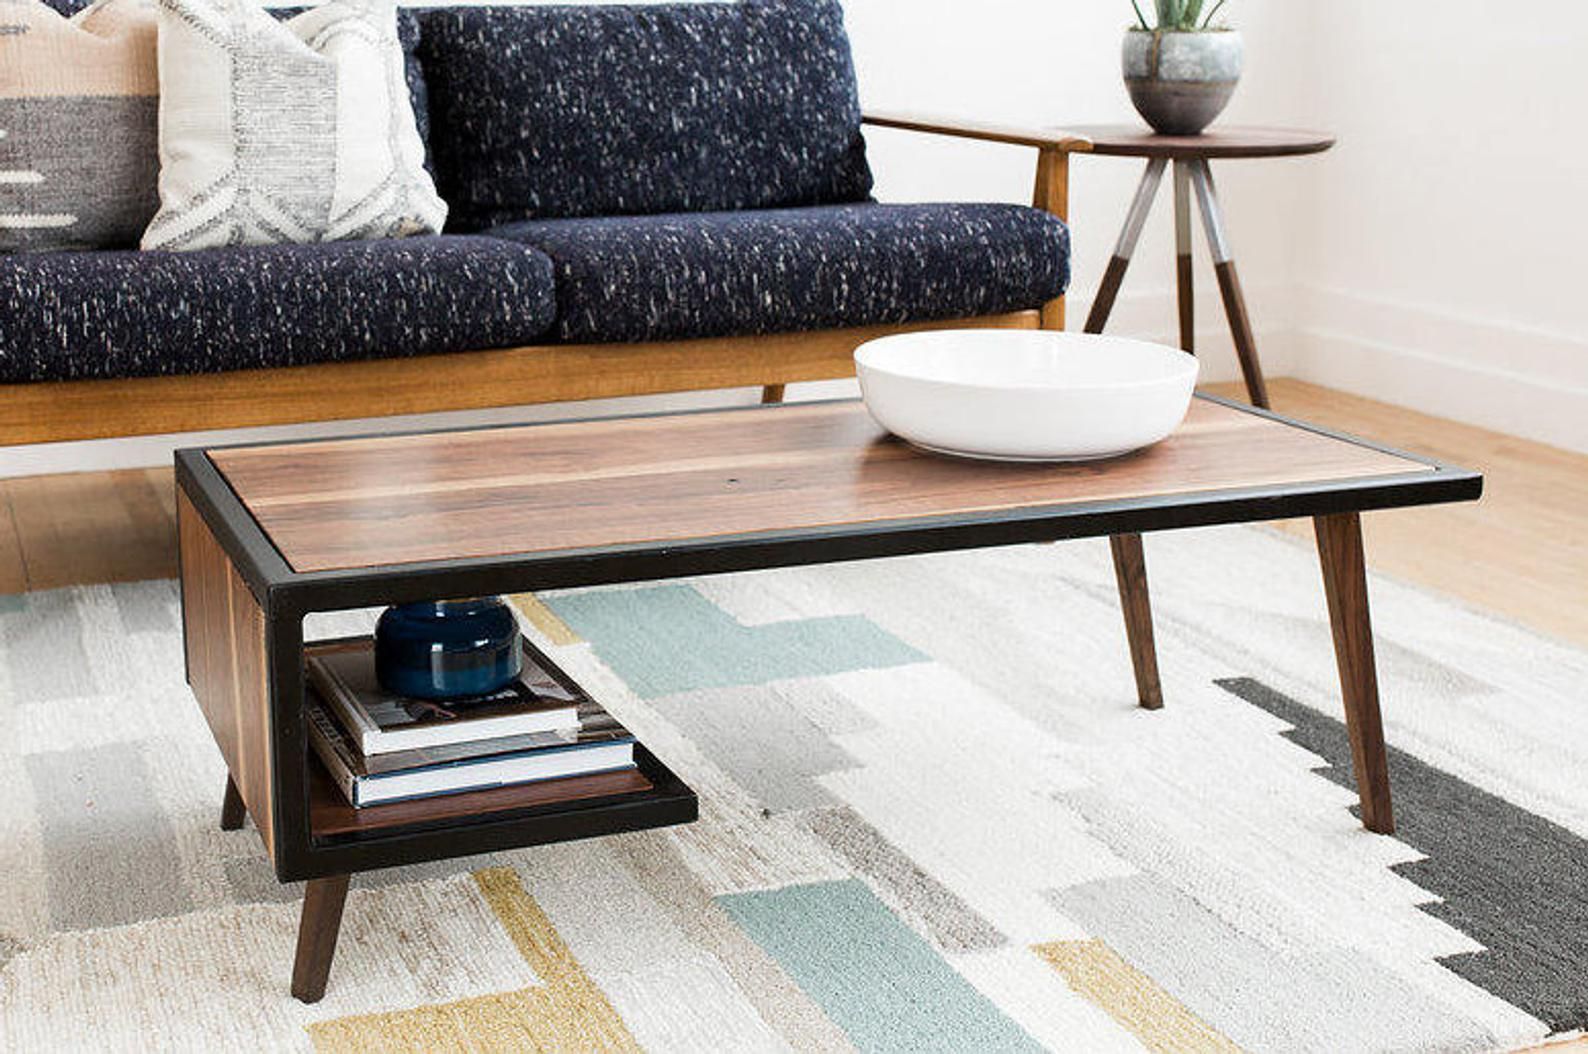 Mid Century Modern Style Coffee Tables You'll Love – Home With Regard To Mid Century Modern Coffee Tables (Gallery 6 of 20)